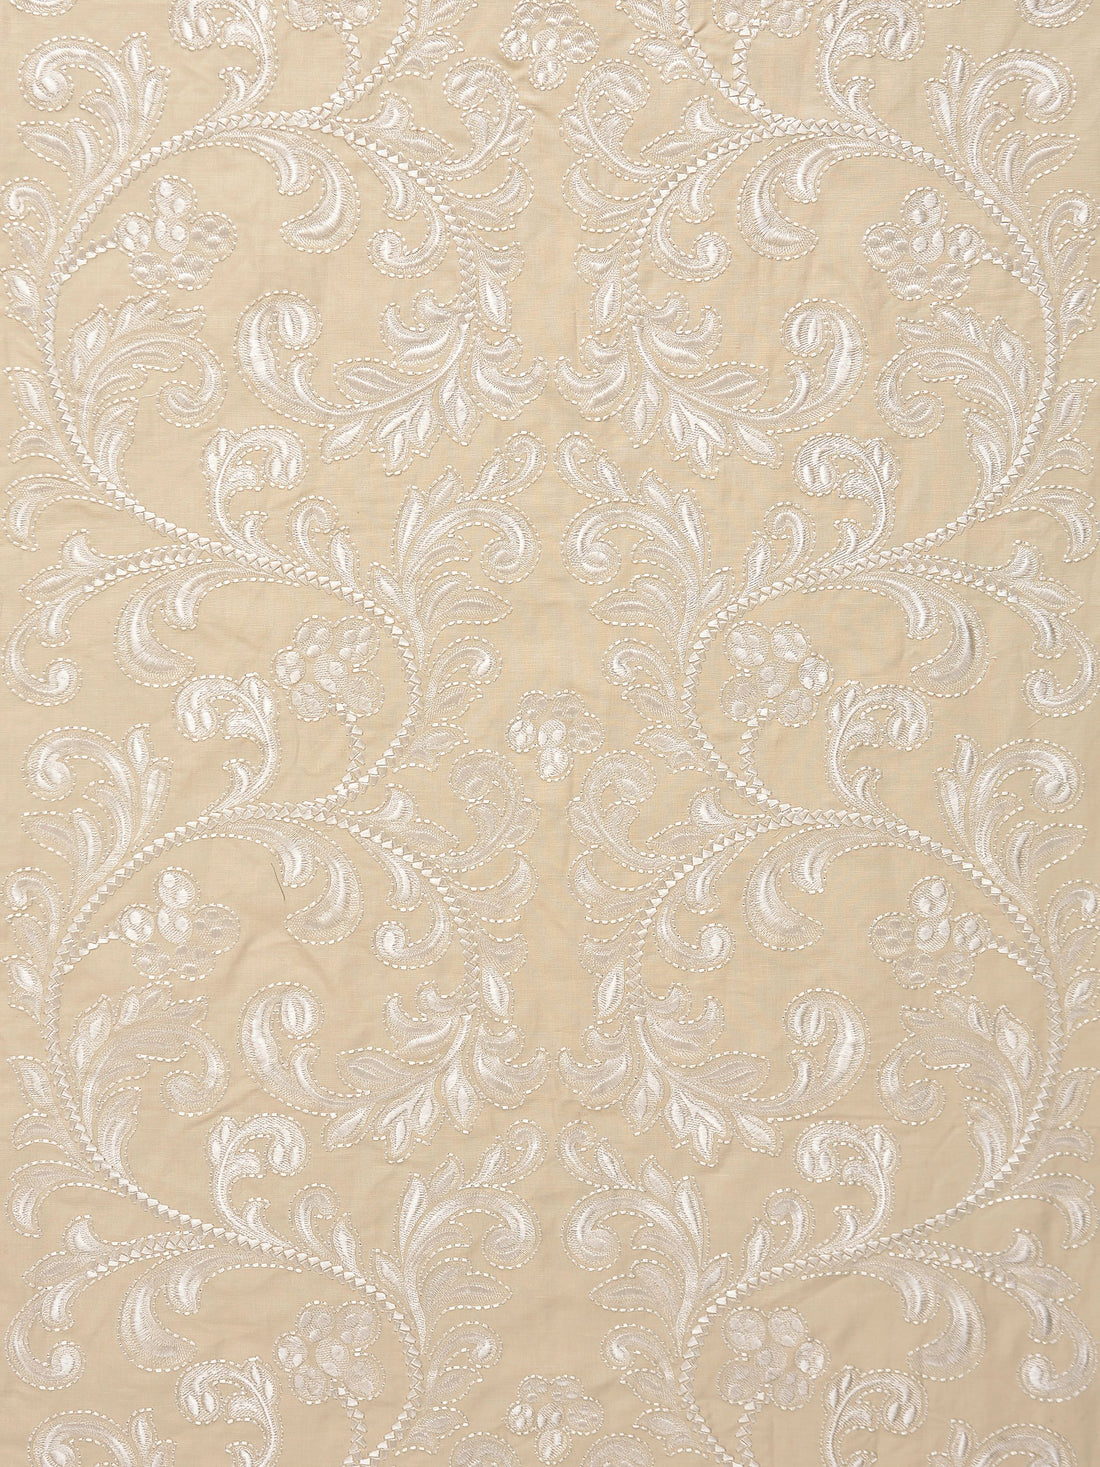 Chiara Embroidery fabric in chardonnay color - pattern number SC 000127029 - by Scalamandre in the Scalamandre Fabrics Book 1 collection